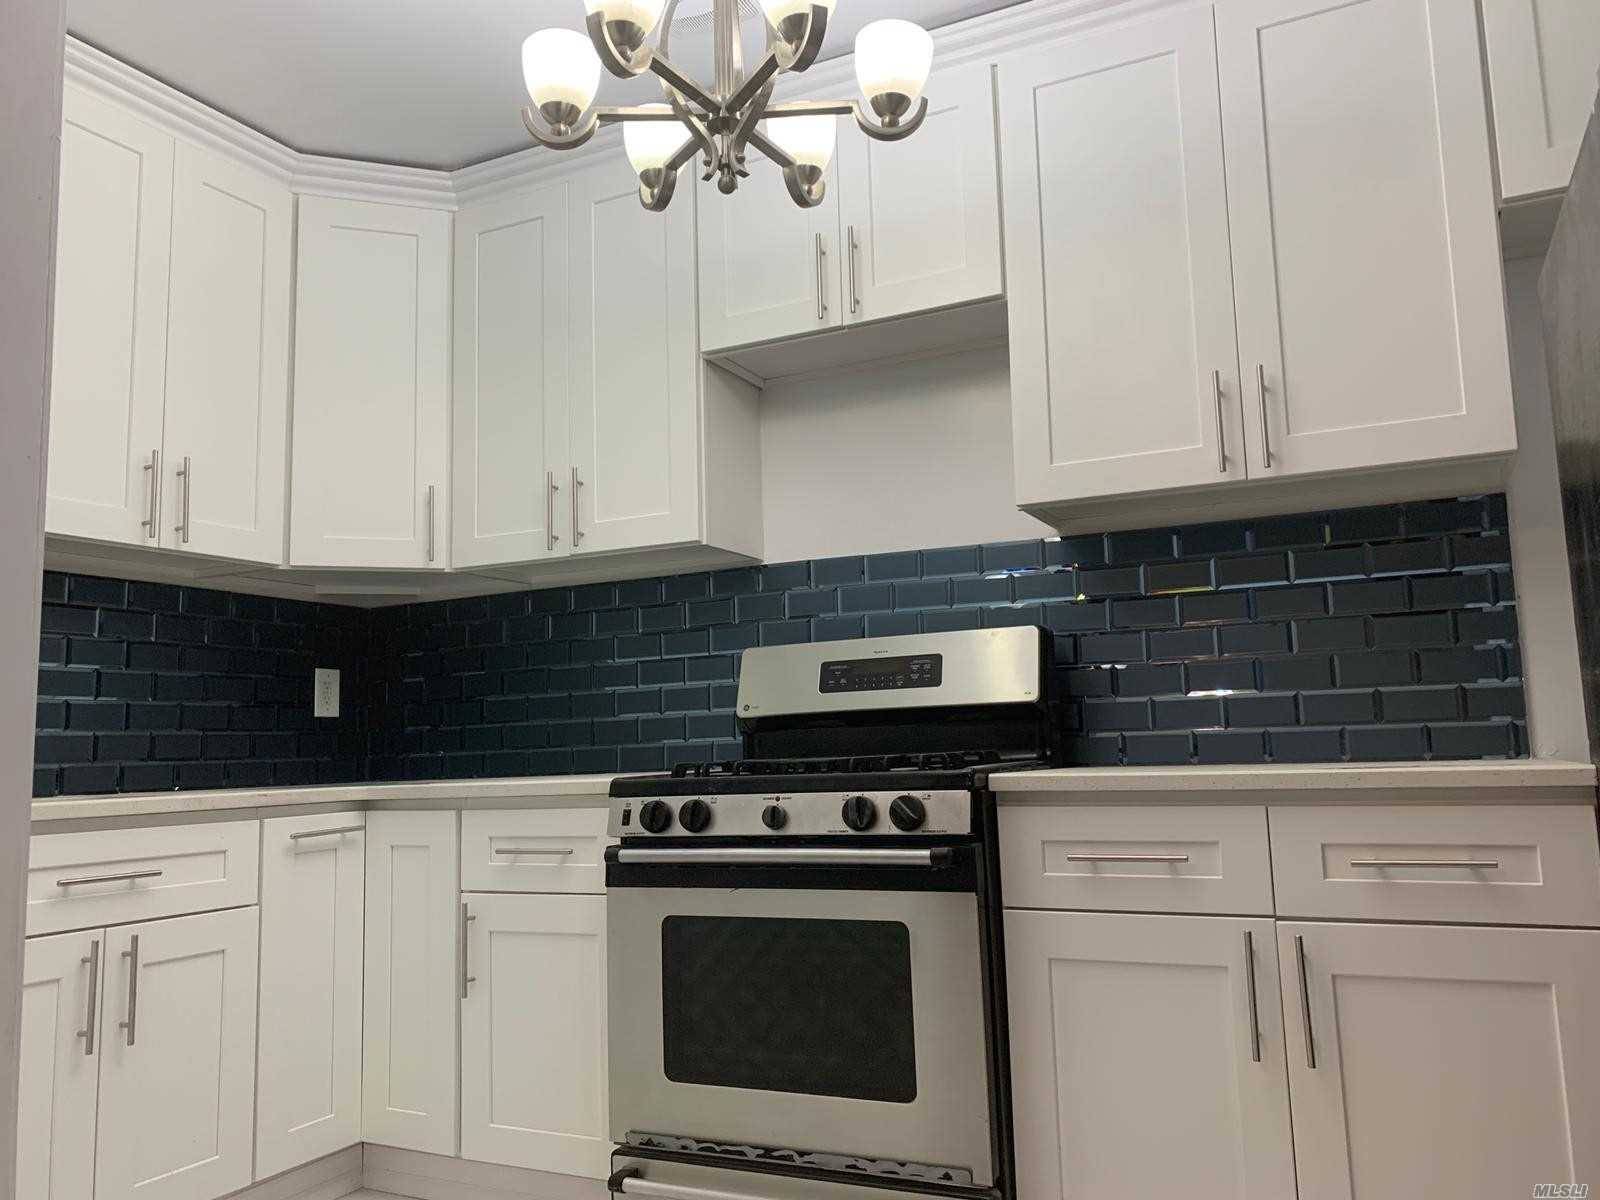 Prime Bronx Location Single Family Home Semi Detached Fully Renovated Huge 3 Bedrooms 2 Full Bathrooms Big Backyard Space And Deck Finished Basement Ose Garage And Private Parking Must See ...